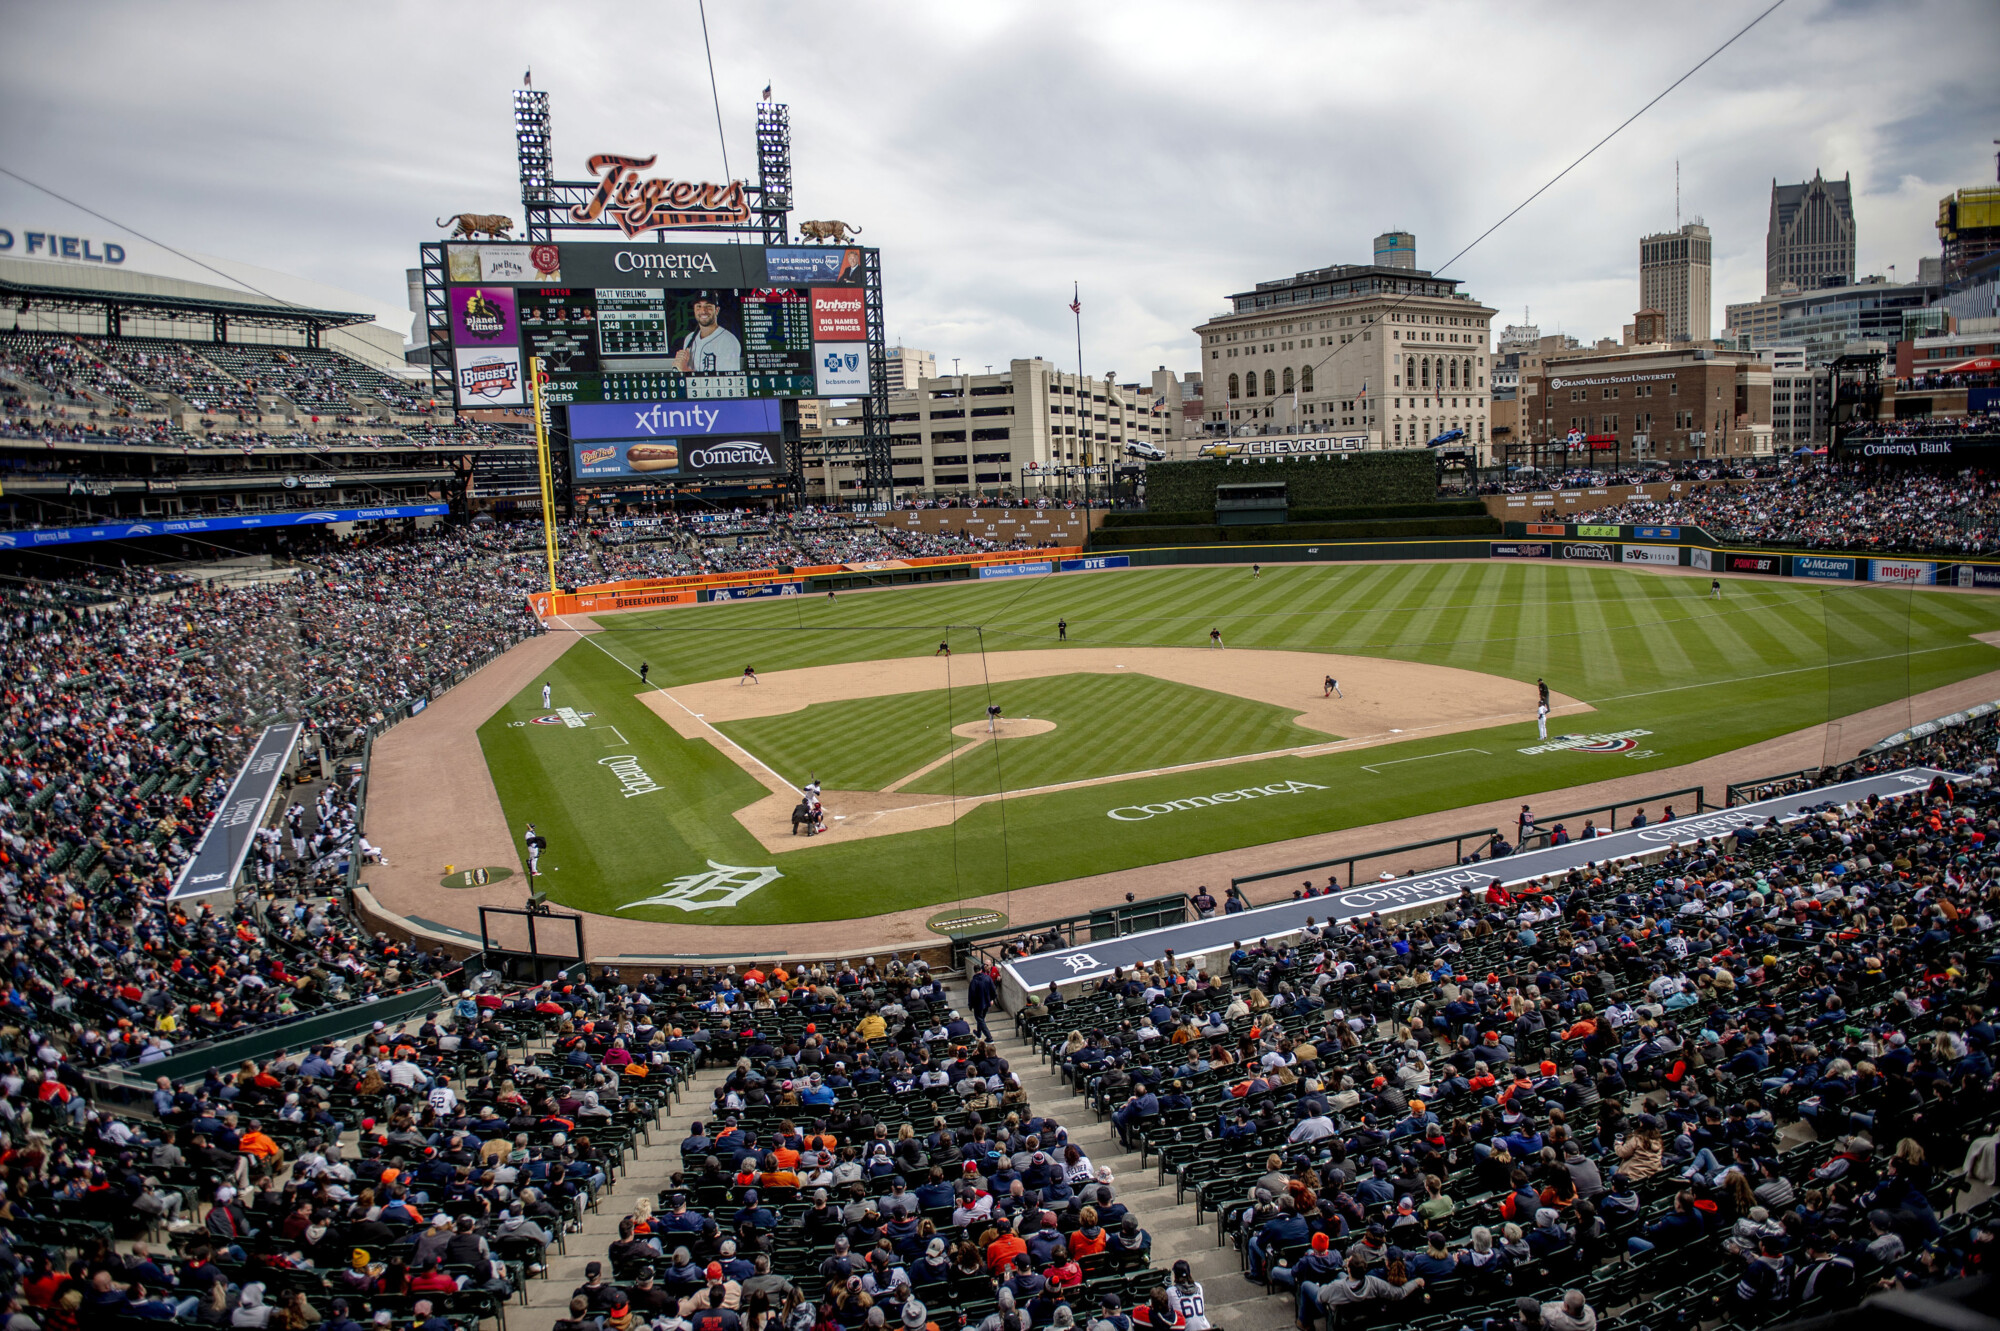 New rules at Comerica Park: What you can and can't take to the ball game